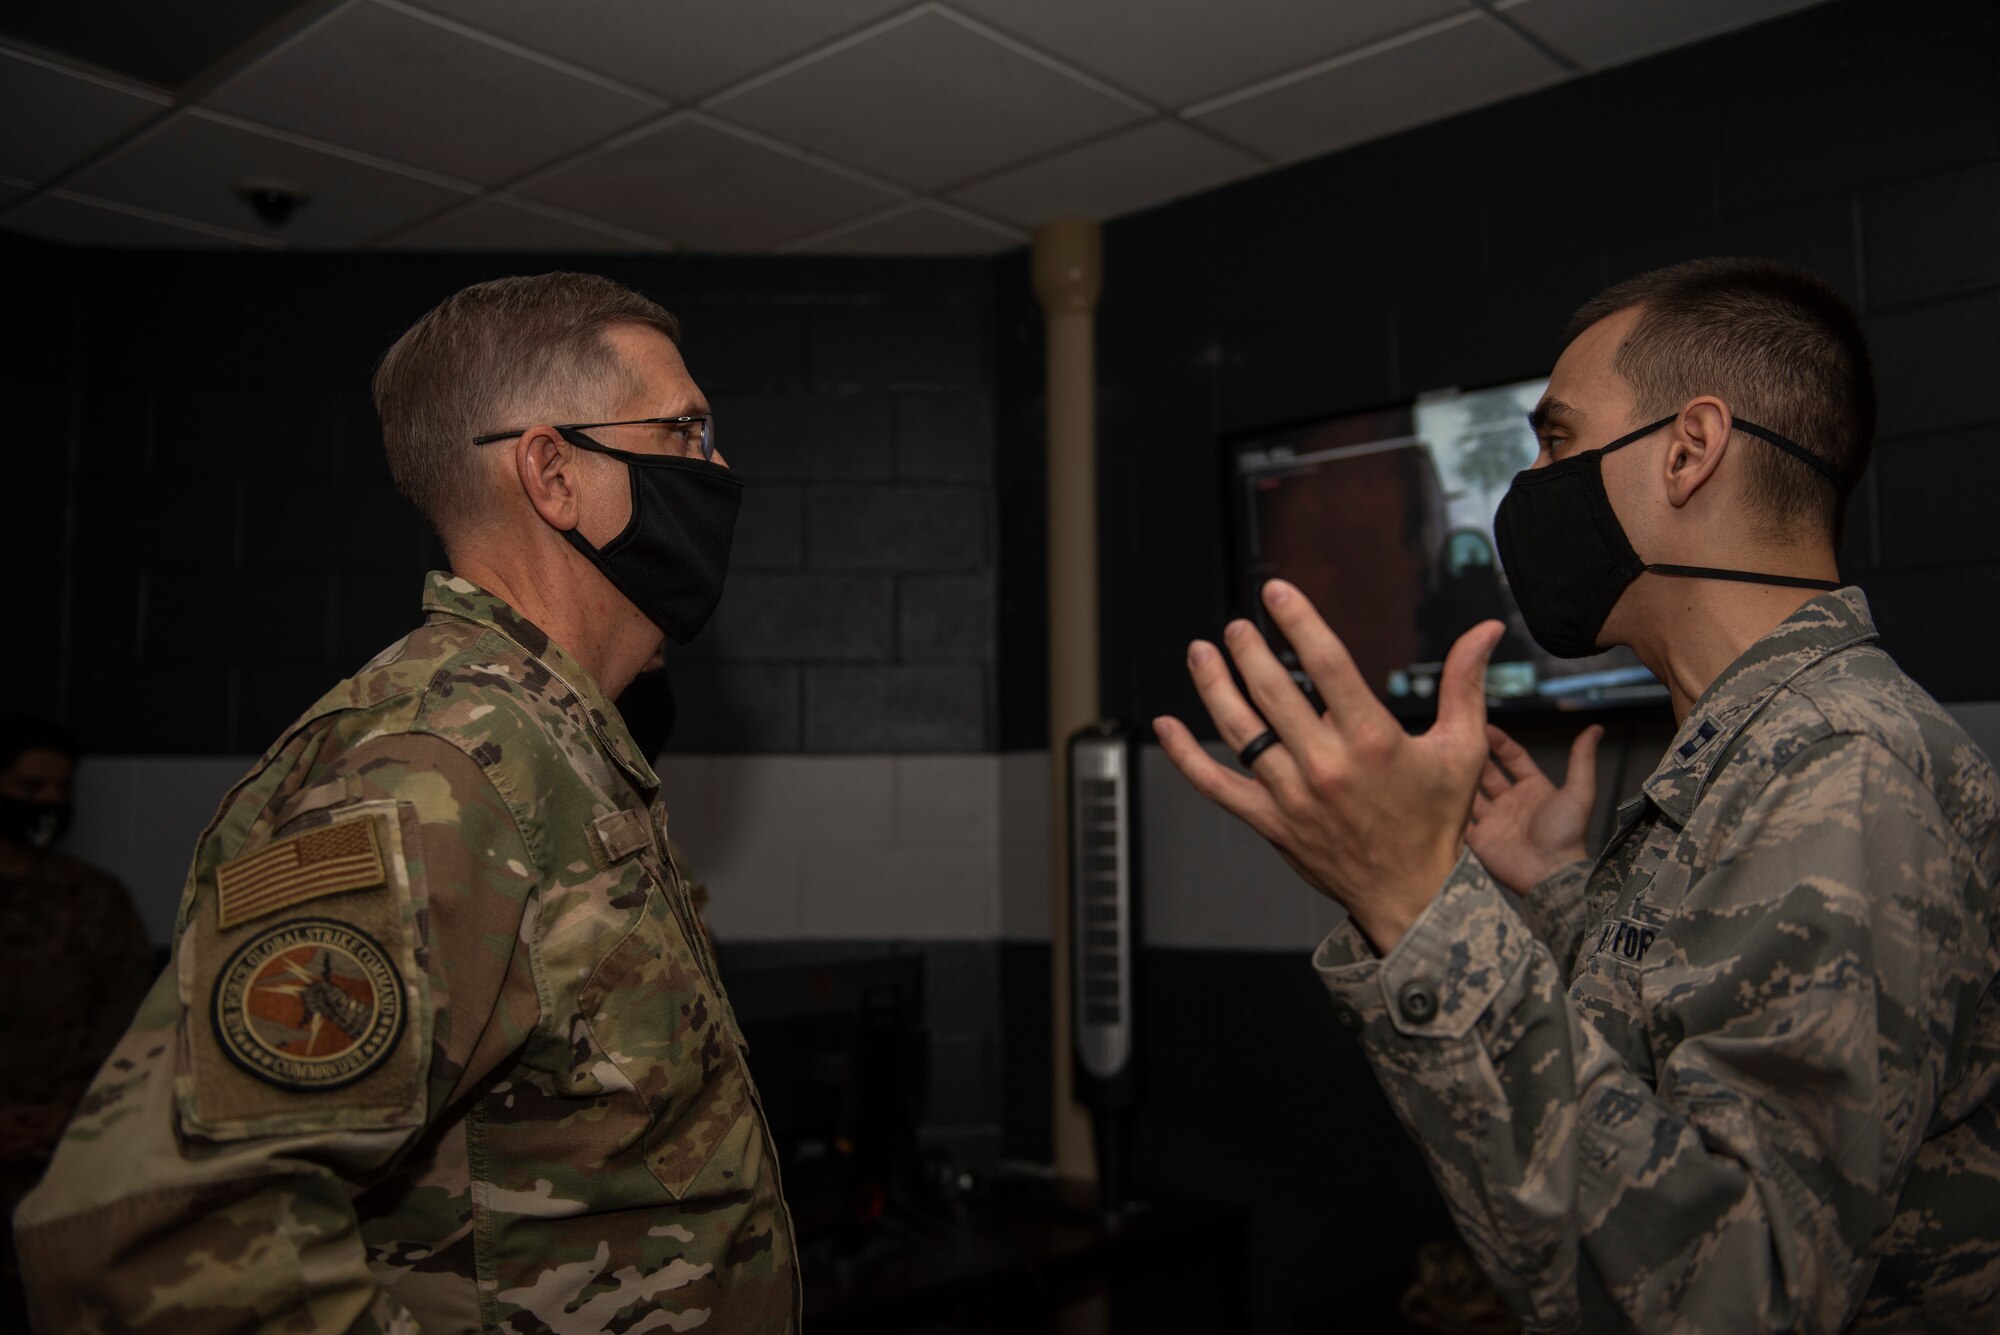 Capt. Simon Peña, 7th Force Support Squadron military personnel flight commander, right, briefs Gen. Tim Ray, Air Force Global Strike Command commander, at Dyess Air Force Base, Texas, Sept. 30, 2020. Peña briefed Ray on the Dyess esports room that was recently stood up at the base fitness center. Dyess esports provides Airmen with a location to compete in individual and team-based video game competitions. (U.S. Air Force photo by Airman 1st Class Colin Hollowell)